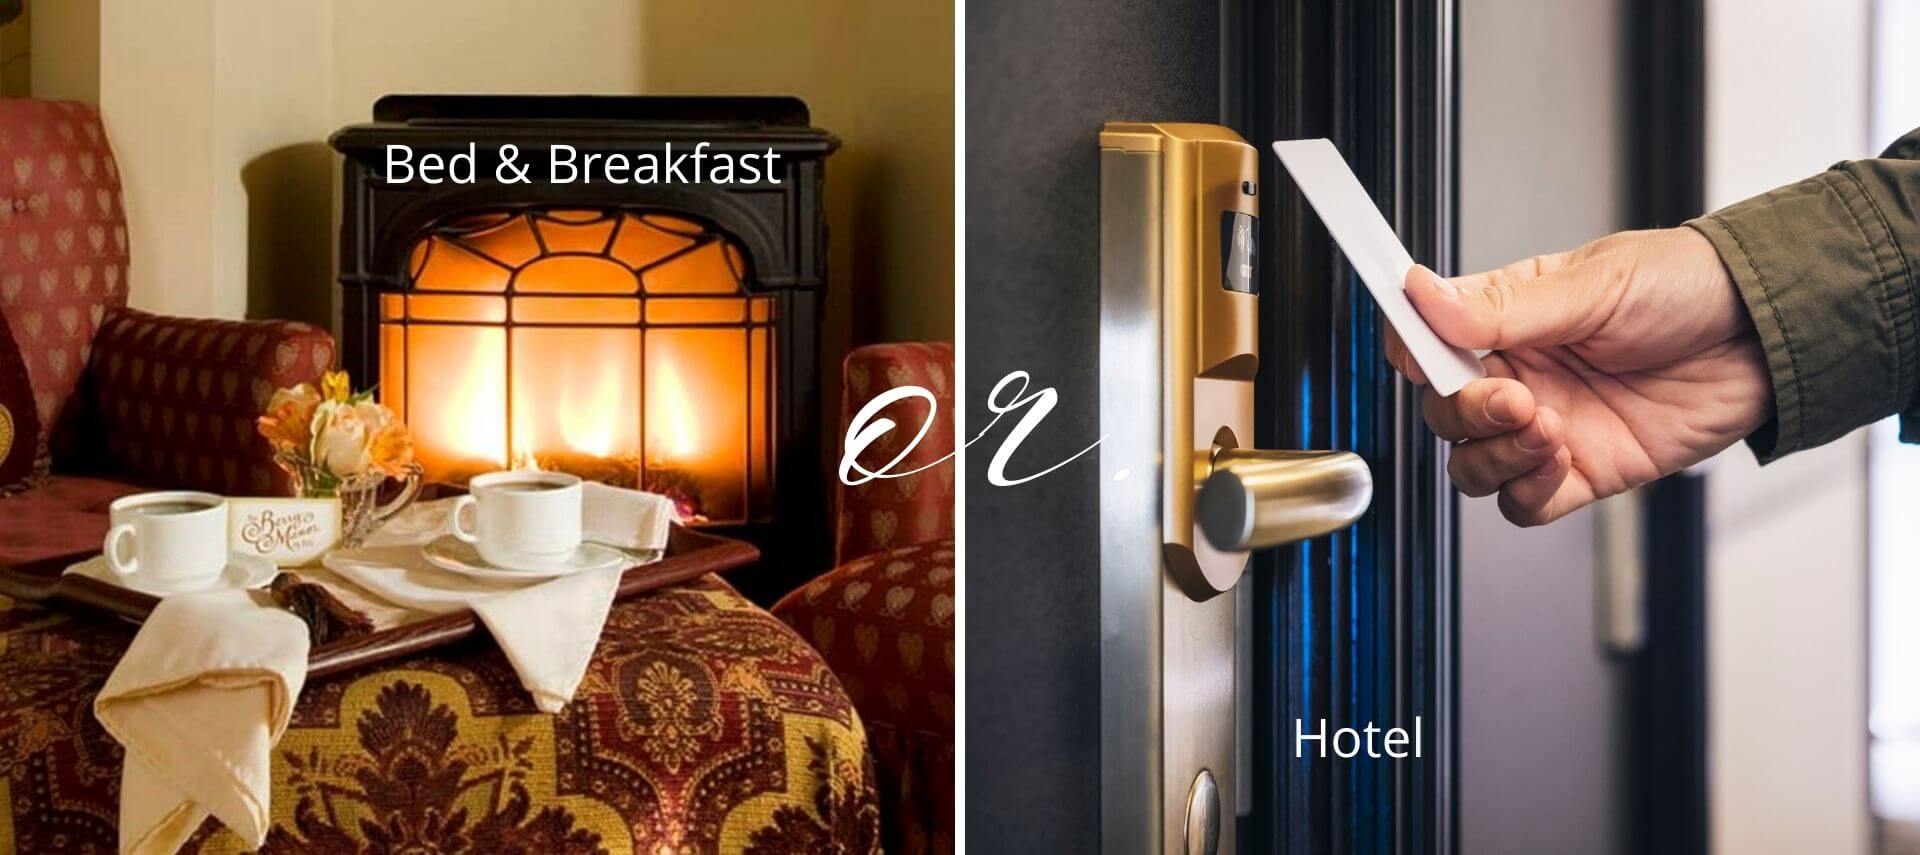 Warm cozy room with fireplace and tray of coffee and key card at hotel door with text of bed and breakfast or hotel